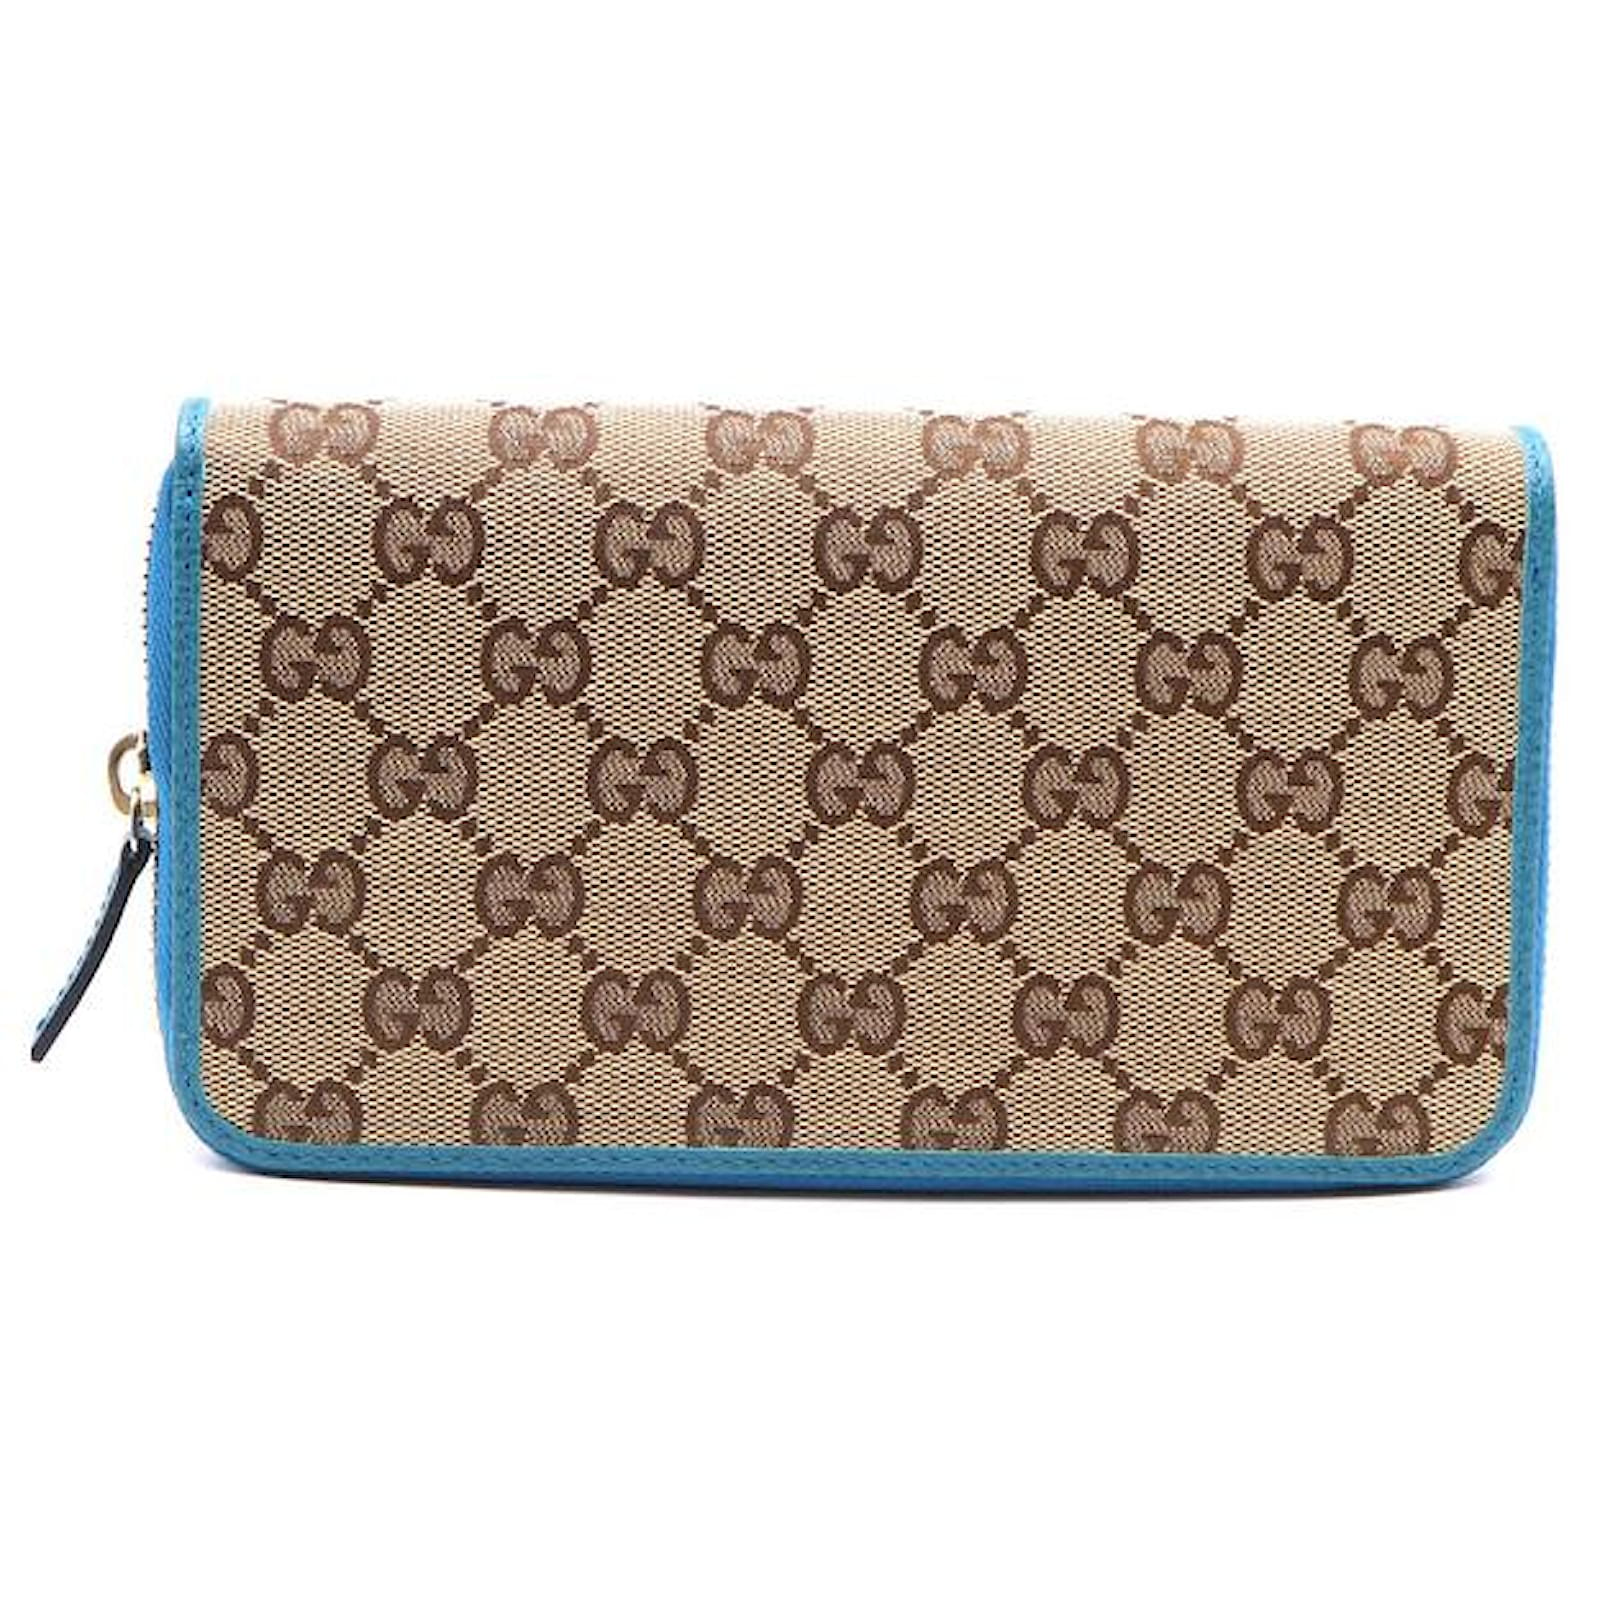 Ophidia GG wallet in beige and blue GG Supreme